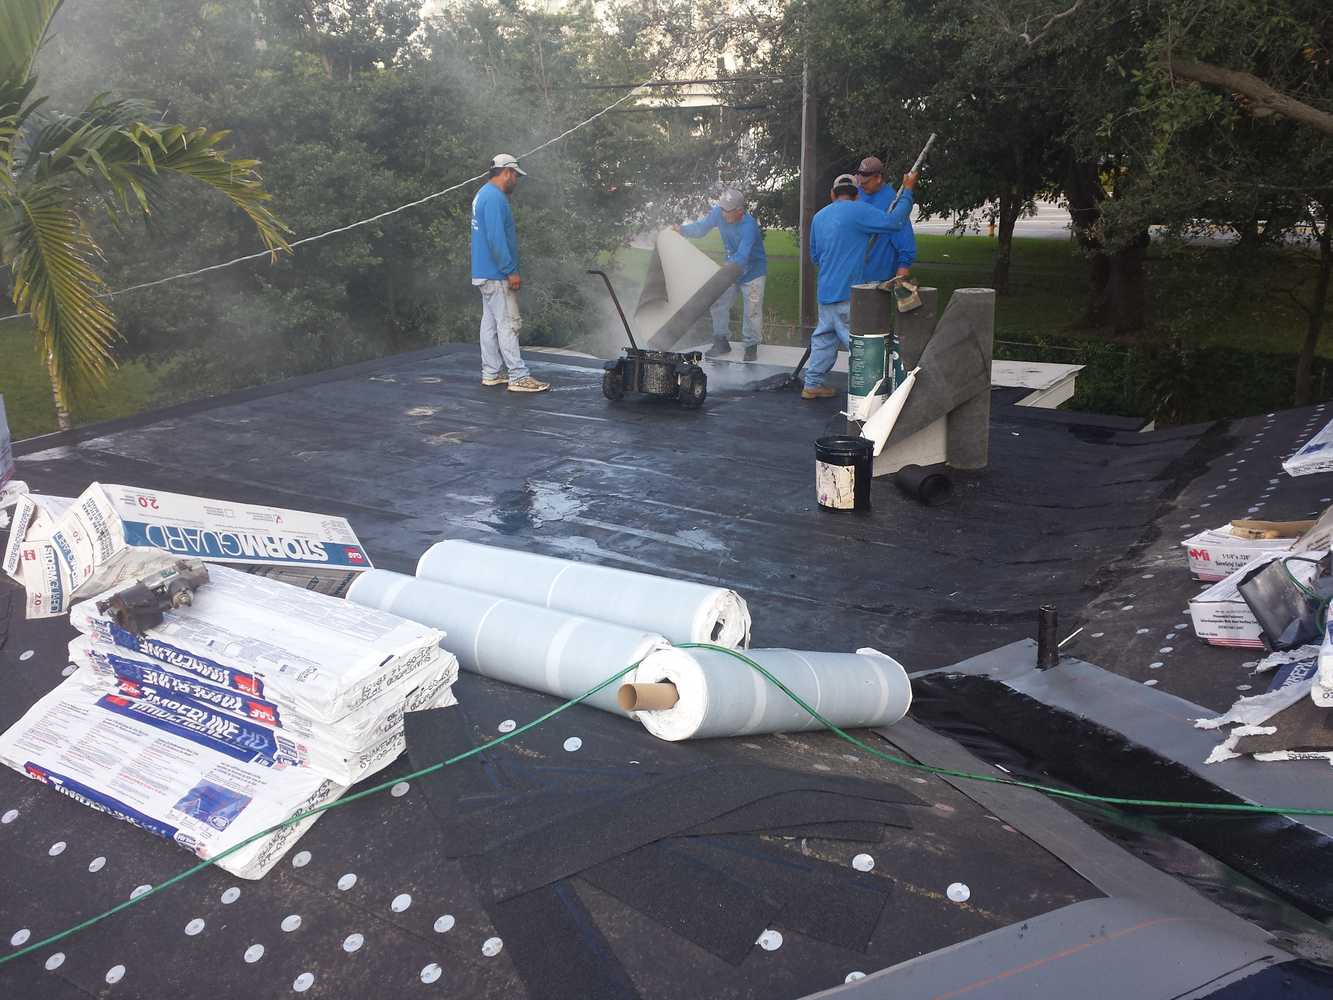 GAF system shingle roof in Coral Gables/Coconut Grove